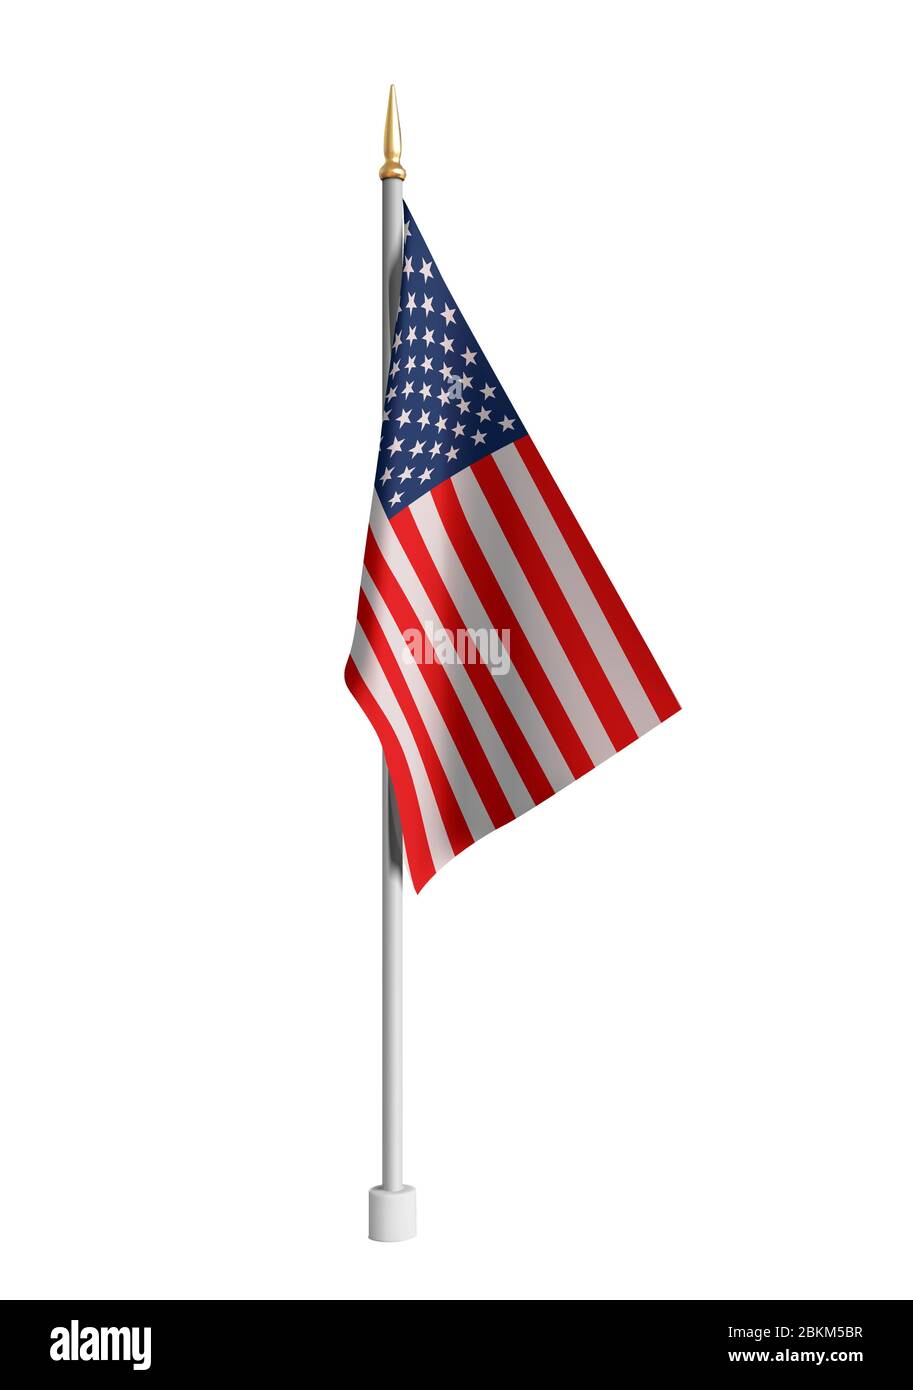 133 American Flag Swim Suit Images, Stock Photos, 3D objects